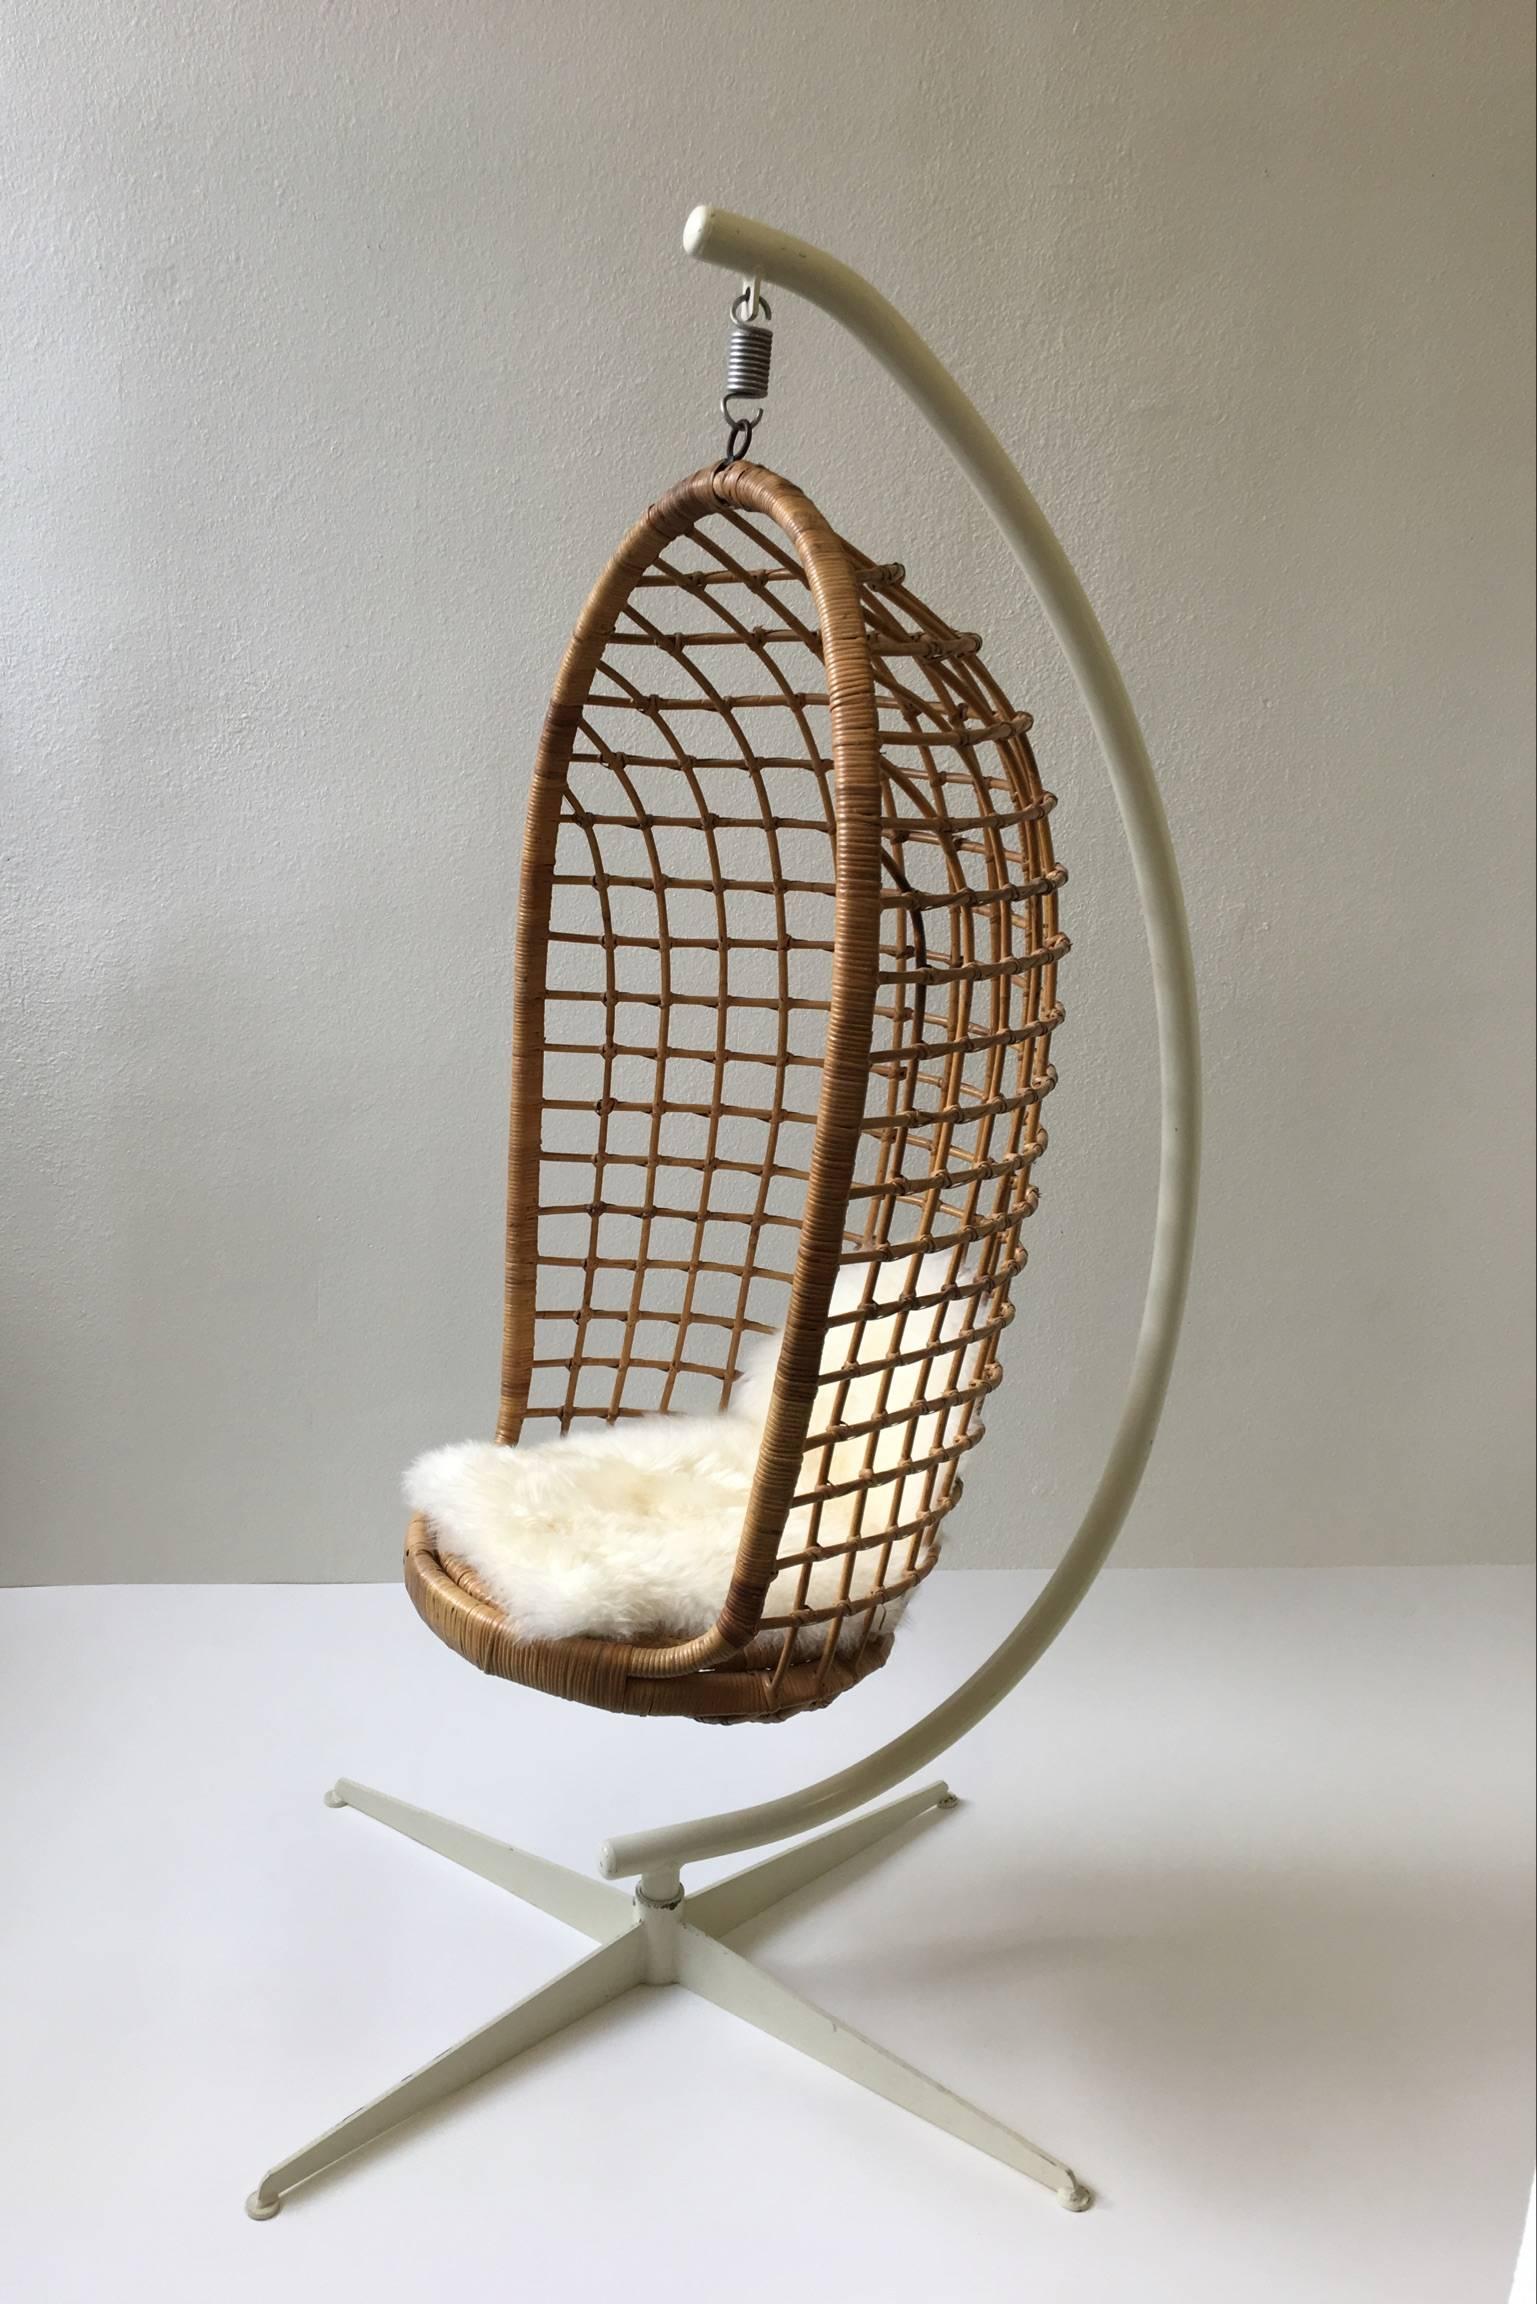 70s hanging chair